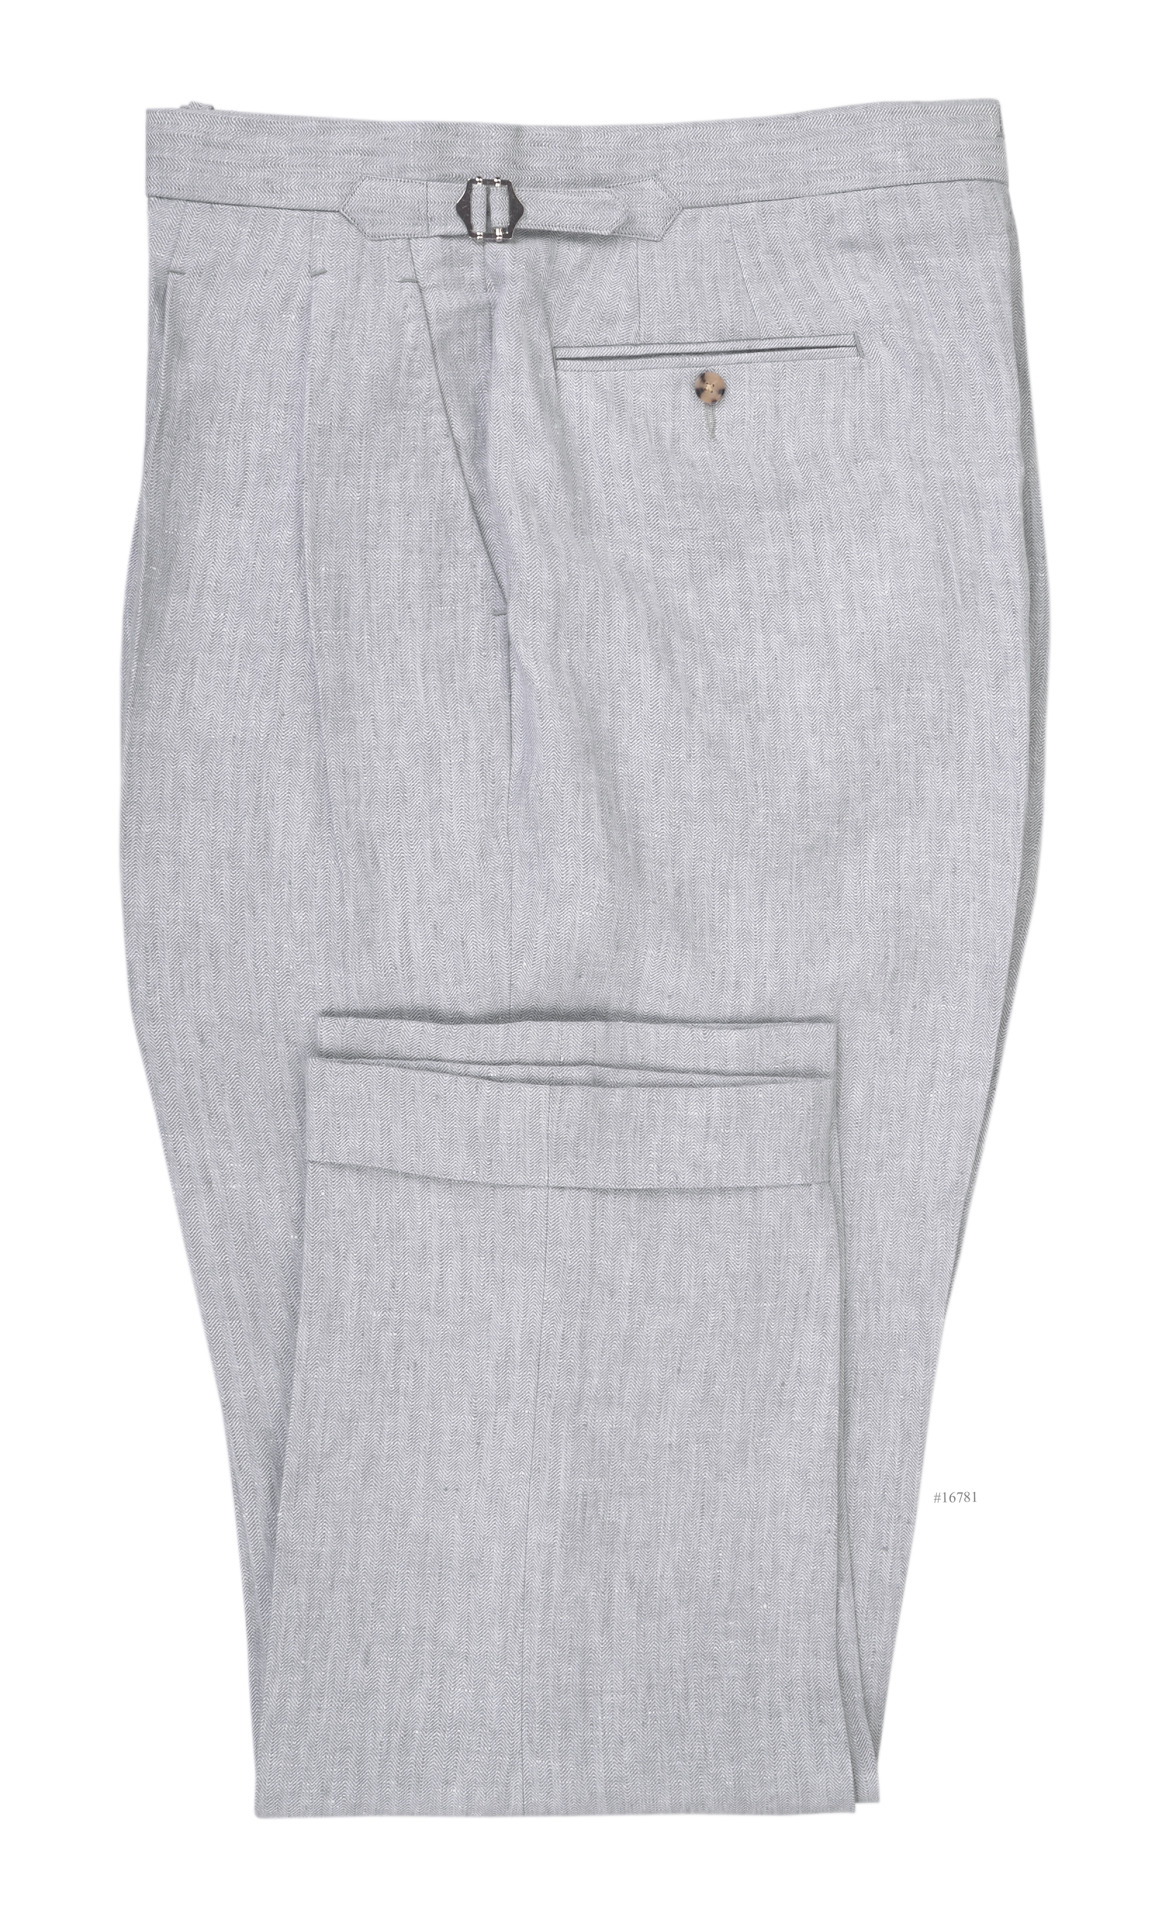 Luxire — Luxire pants constructed in Linen: Pale Grey...